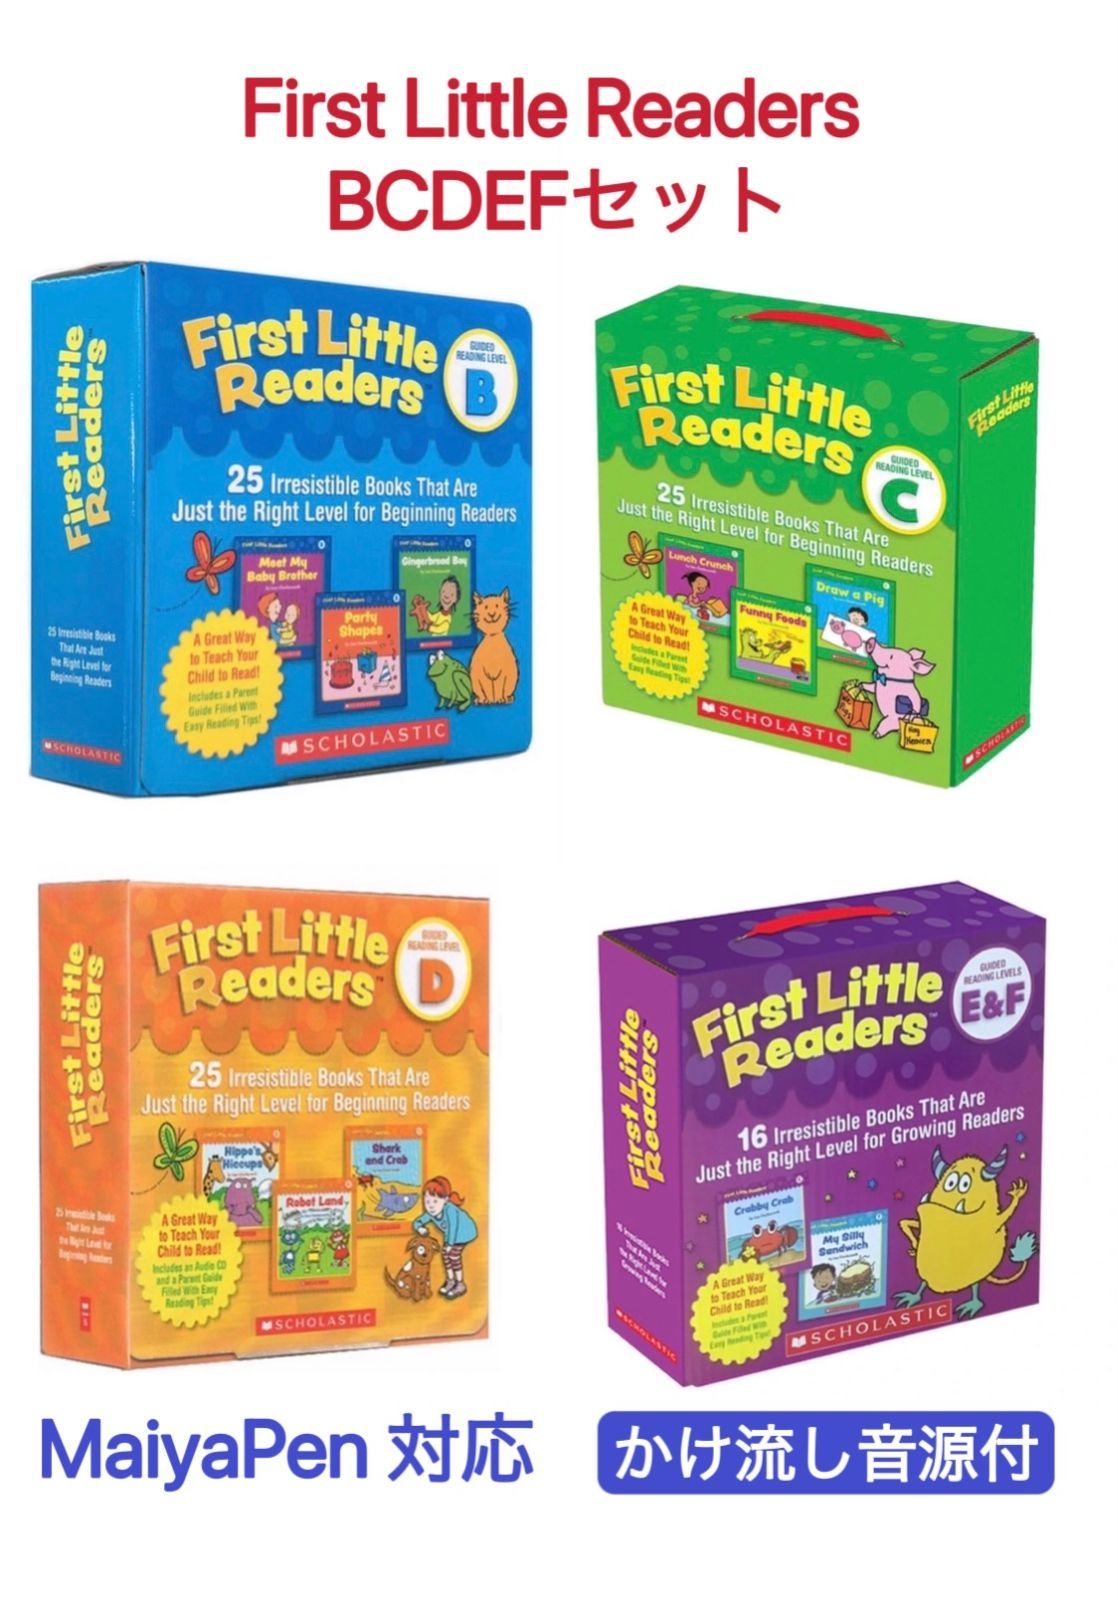 first little readers マイヤペン対応 英語絵本 多聴多読